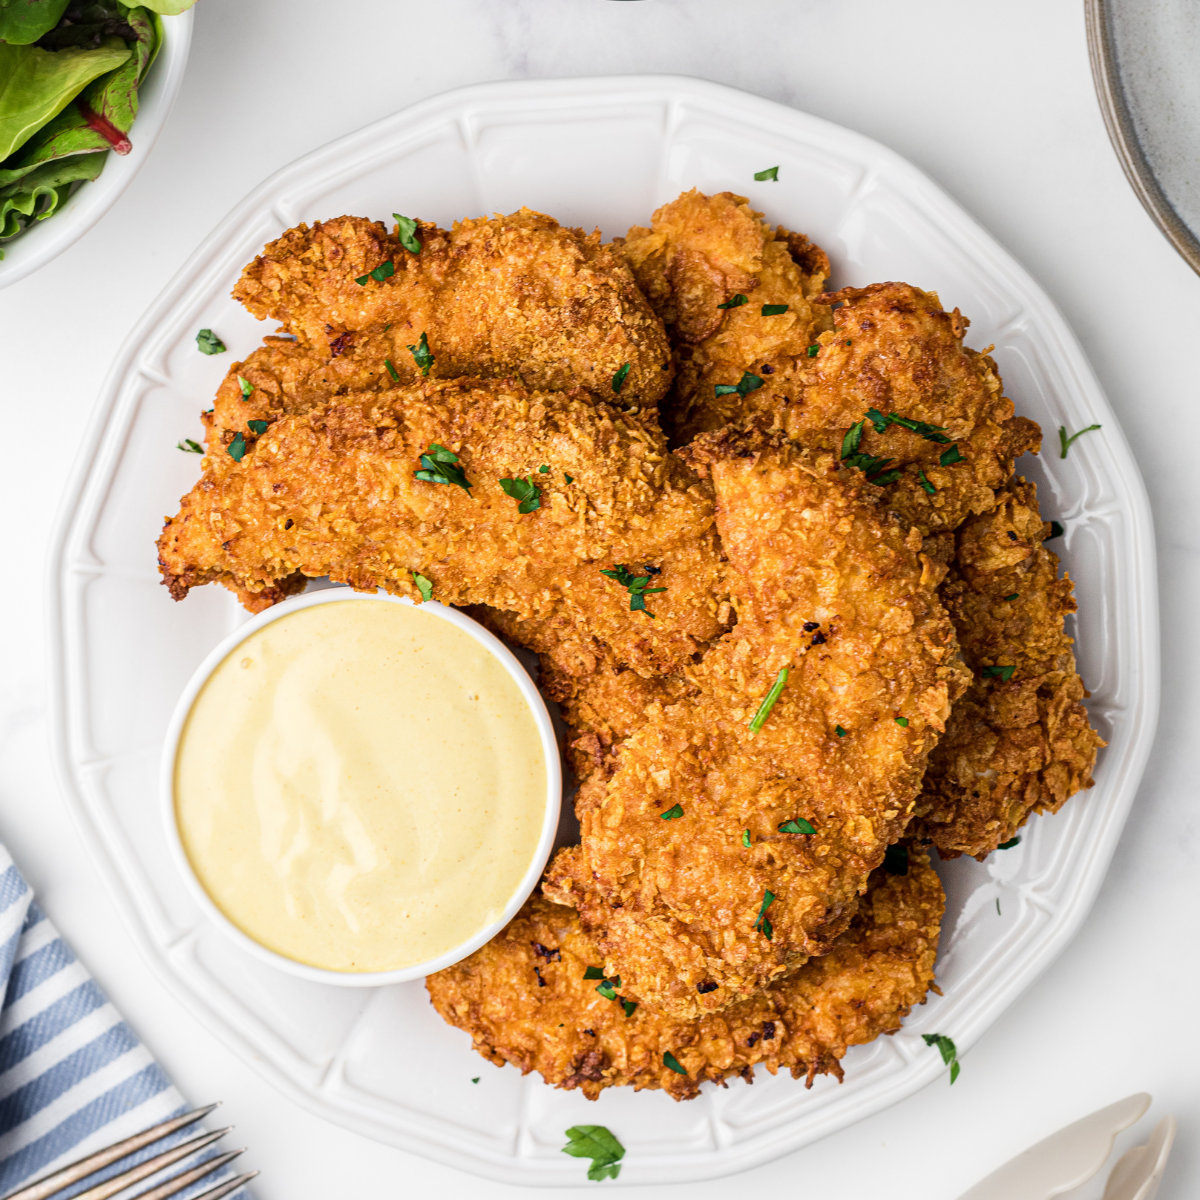 
Here are some pro tips for making perfect Copycat Zaxby's Chicken Fingers in an air fryer:

Use Panko Breadcrumbs: Panko breadcrumbs are Japanese breadcrumbs that are larger and airier than traditional breadcrumbs. They result in a crispier, crunchier coating.

Don't Overcrowd the Basket: For the crispiest chicken fingers, make sure they're not touching or overlapping in the air fryer basket. If necessary, cook them in batches.

Shake the Basket: Halfway through the cooking time, you can shake the basket to ensure the chicken fingers are cooking evenly.

Use an Instant-Read Thermometer: The safest way to check if your chicken is done is by using an instant-read thermometer. It should read 165°F (74°C) in the thickest part of the chicken.

Make Your Own Zax Sauce: Zaxby's is famous for their Zax Sauce. Try making your own at home with mayonnaise, ketchup, garlic powder, Worcestershire sauce, and a bit of black pepper.

Pat Dry the Chicken: Make sure to pat dry the chicken tenders before breading them. This helps the coating stick better to the chicken.

Keep the Breading Light: Do not press too hard when applying the breadcrumbs; you want a light, airy coating that gets really crispy.

Spray with Cooking Spray: Just before air frying, spray the chicken fingers with cooking spray. This helps them get golden and crispy.

Remember, the key to perfect chicken fingers is patience and attention to detail. Follow these tips, and you're sure to end up with delicious, crispy, and flavorful chicken fingers!